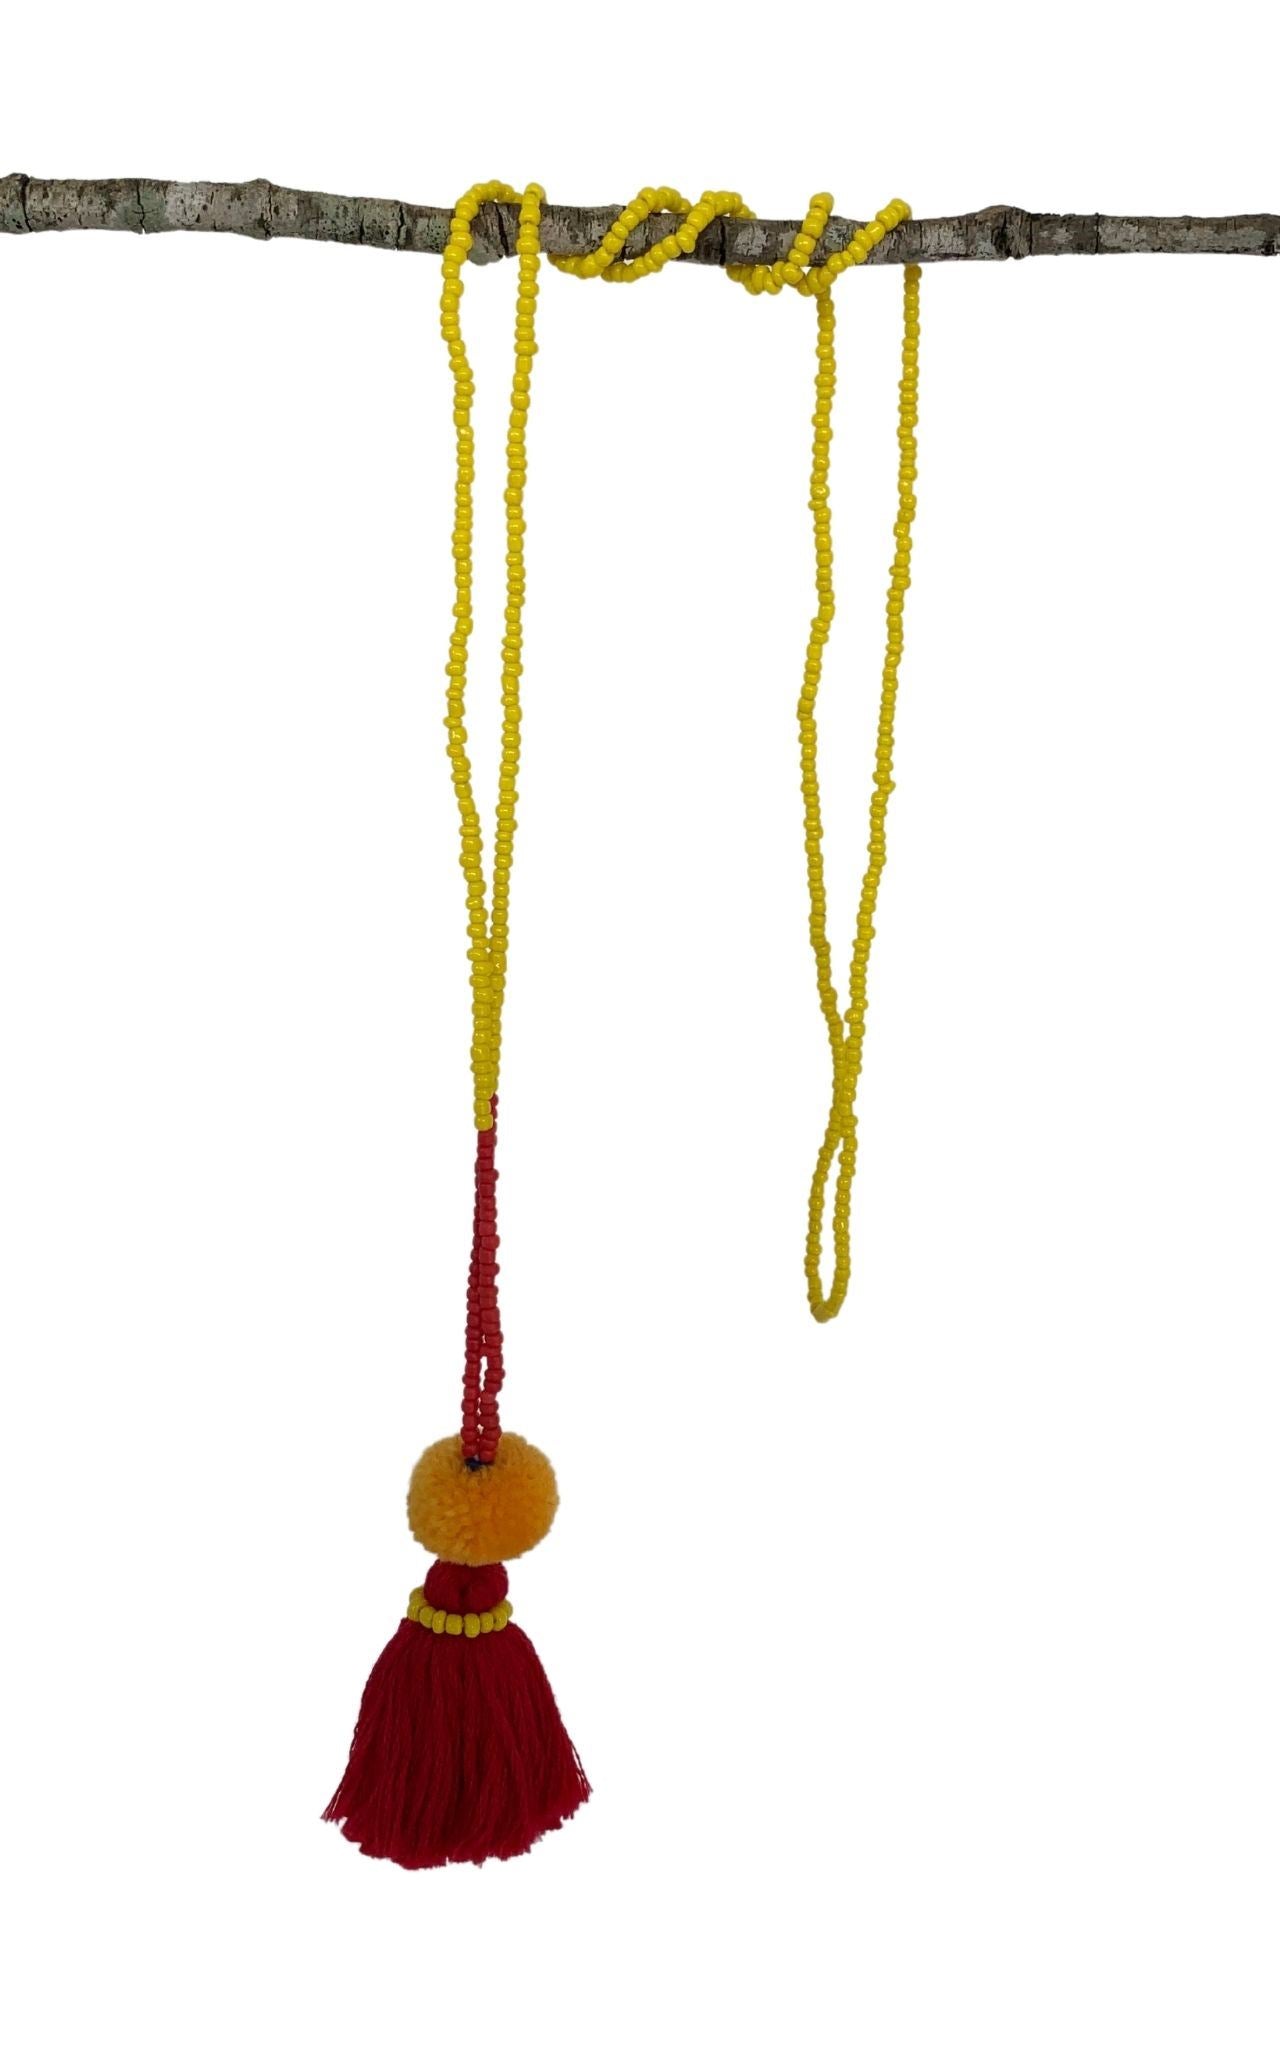 Surya Australia Cotton Tassel Necklaces from Nepal - Red + Yellow